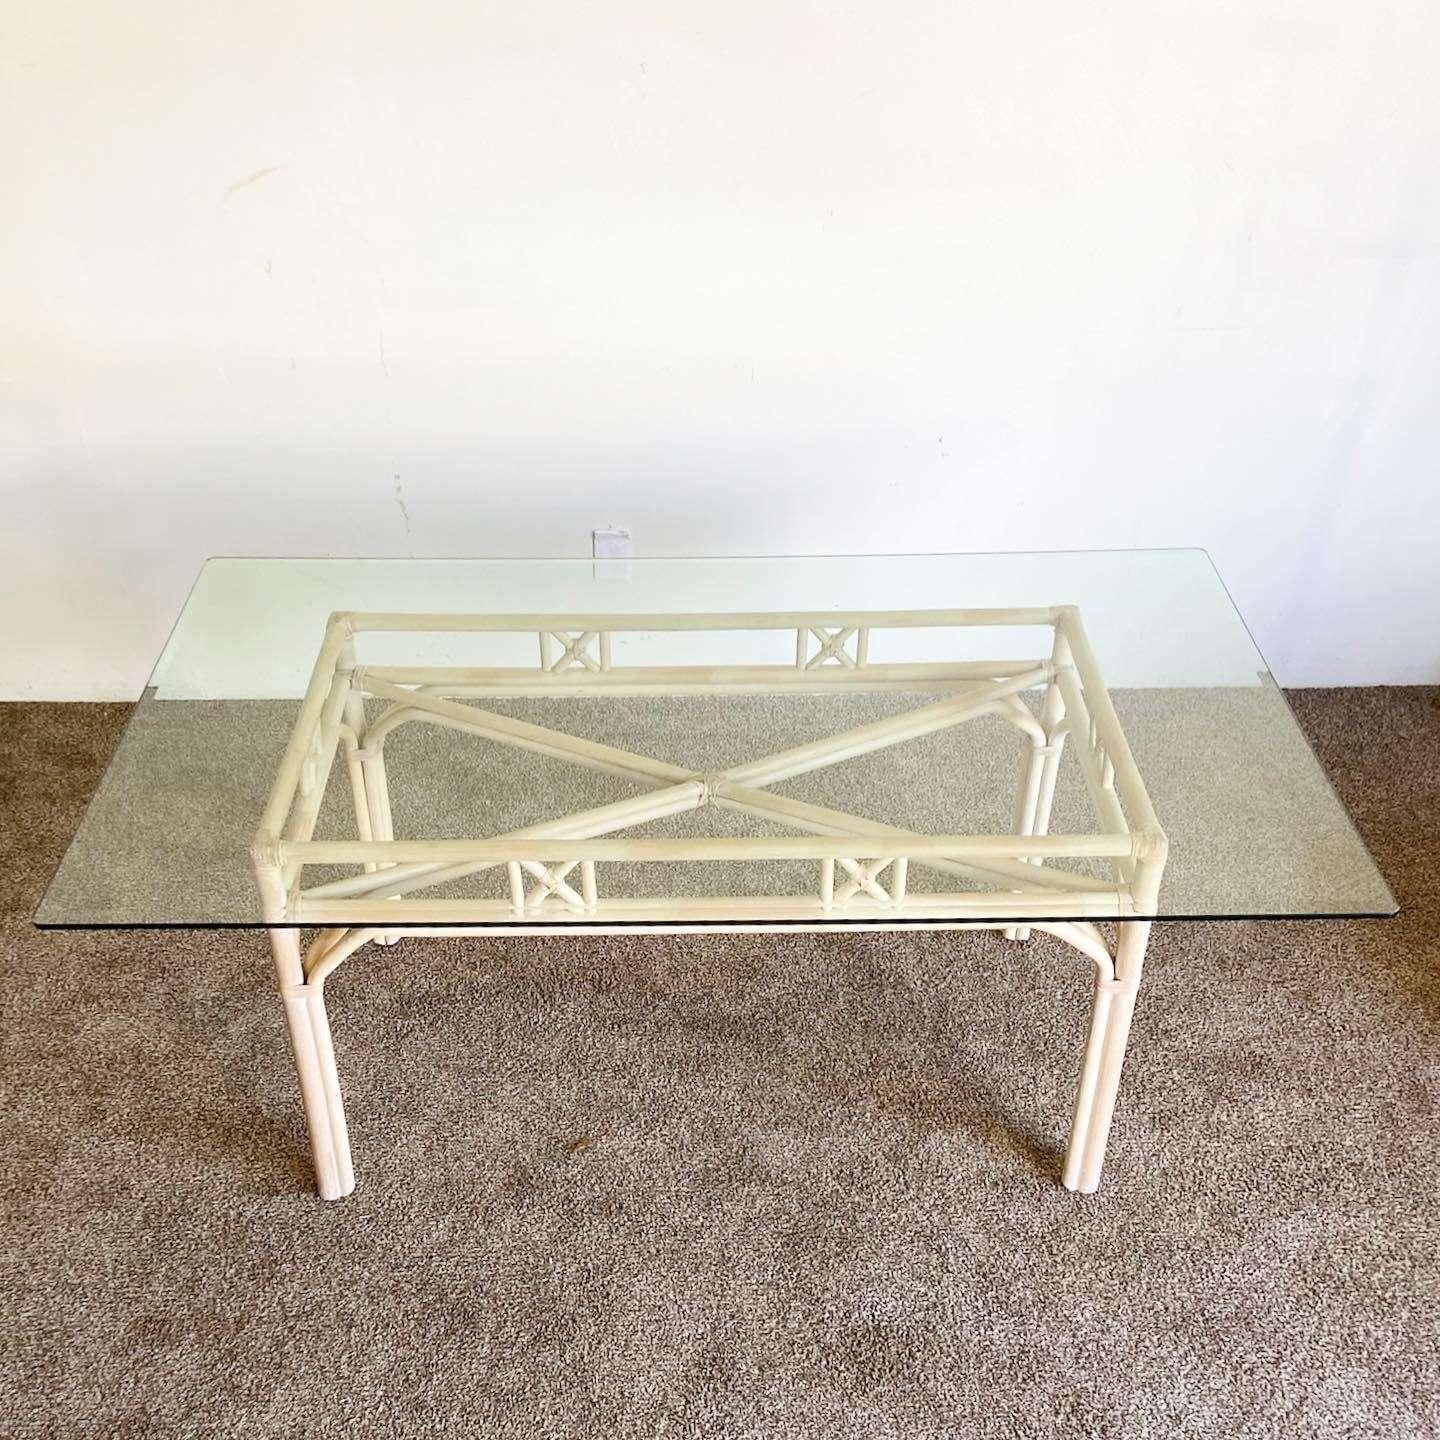 Boho Chic Beveled Glass Top Bamboo Rattan Rectangular Dining Table In Good Condition For Sale In Delray Beach, FL